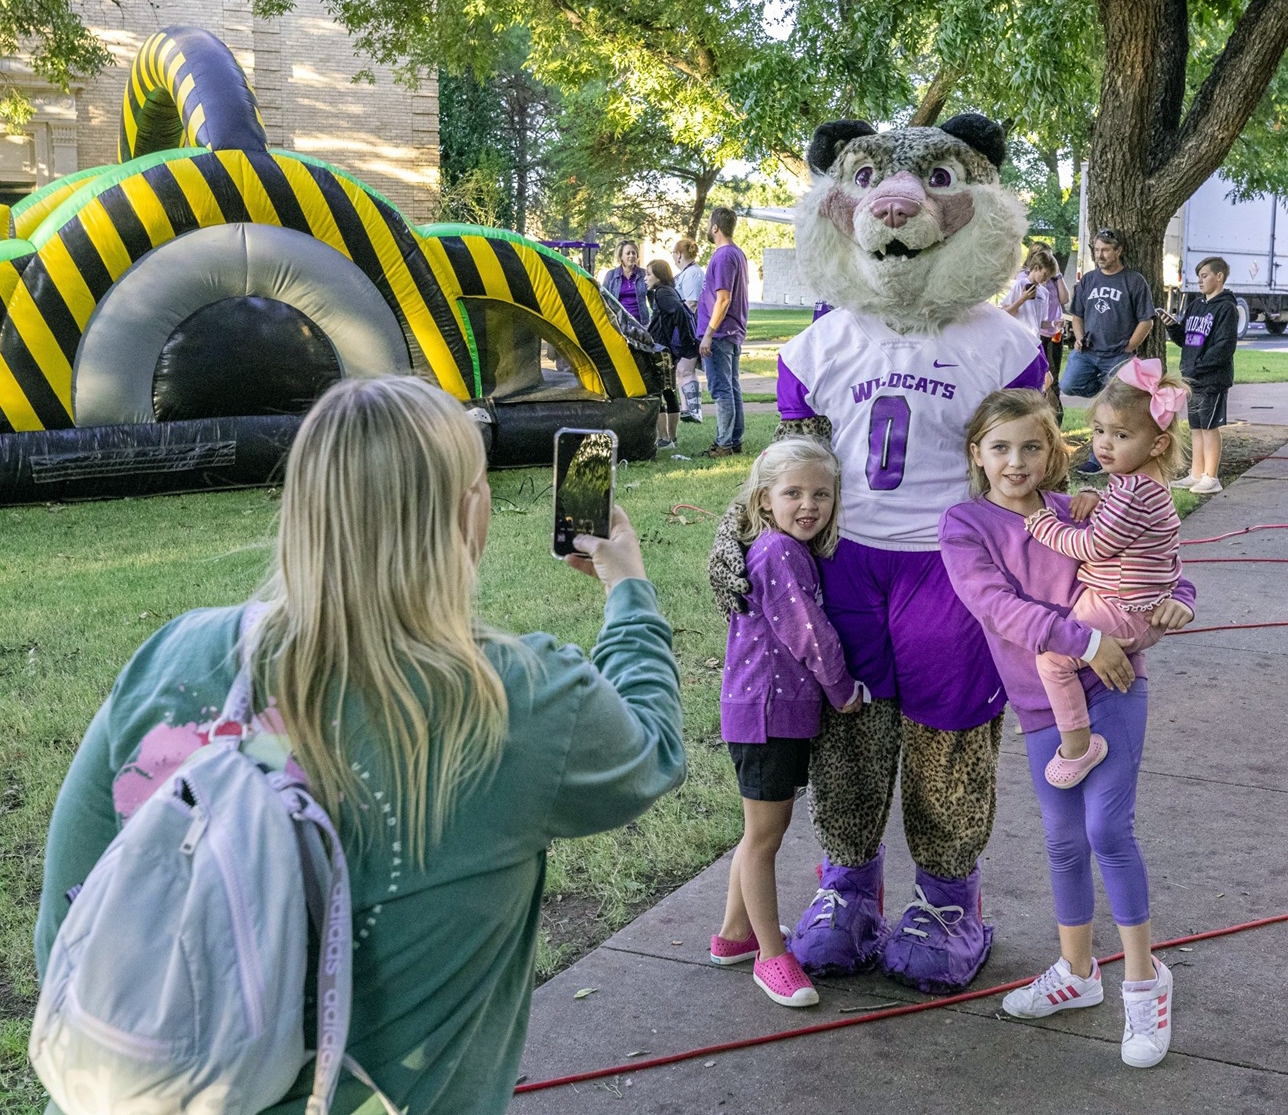 Willie the Wildcat poses with young visitors during ACU’s 2021 Homecoming.